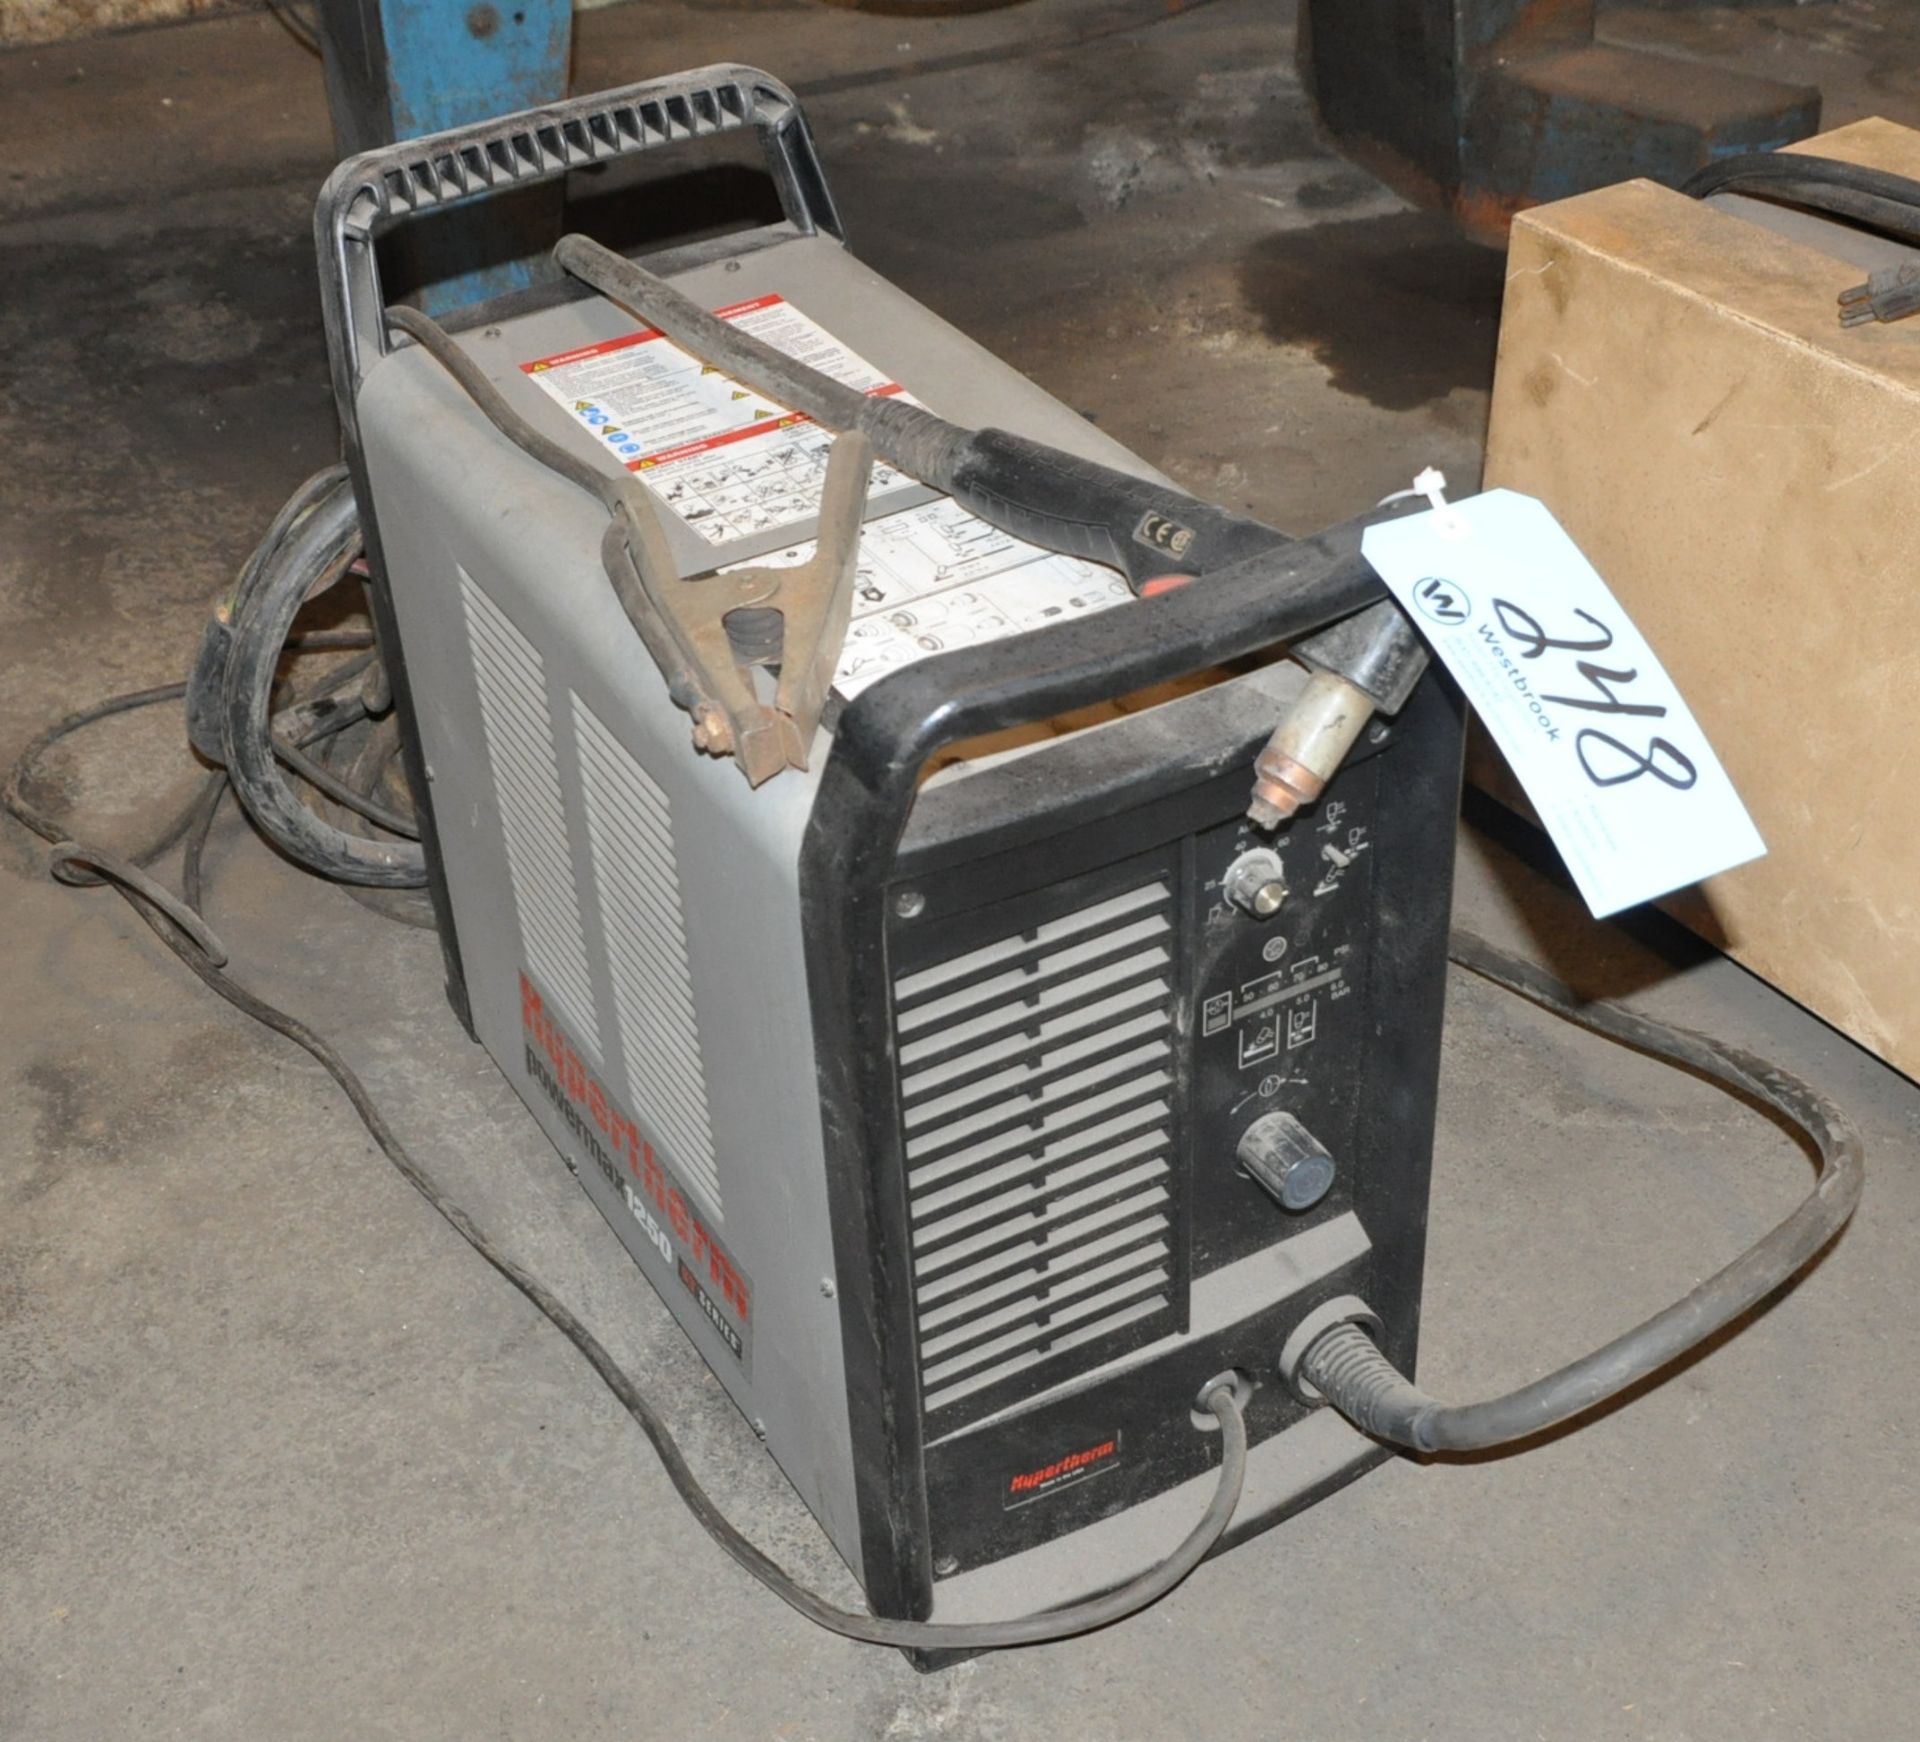 Hypertherm Powermax 1250, Plasma Cutter, with Leads, 1-PH, (Bldg 2) - Image 2 of 3